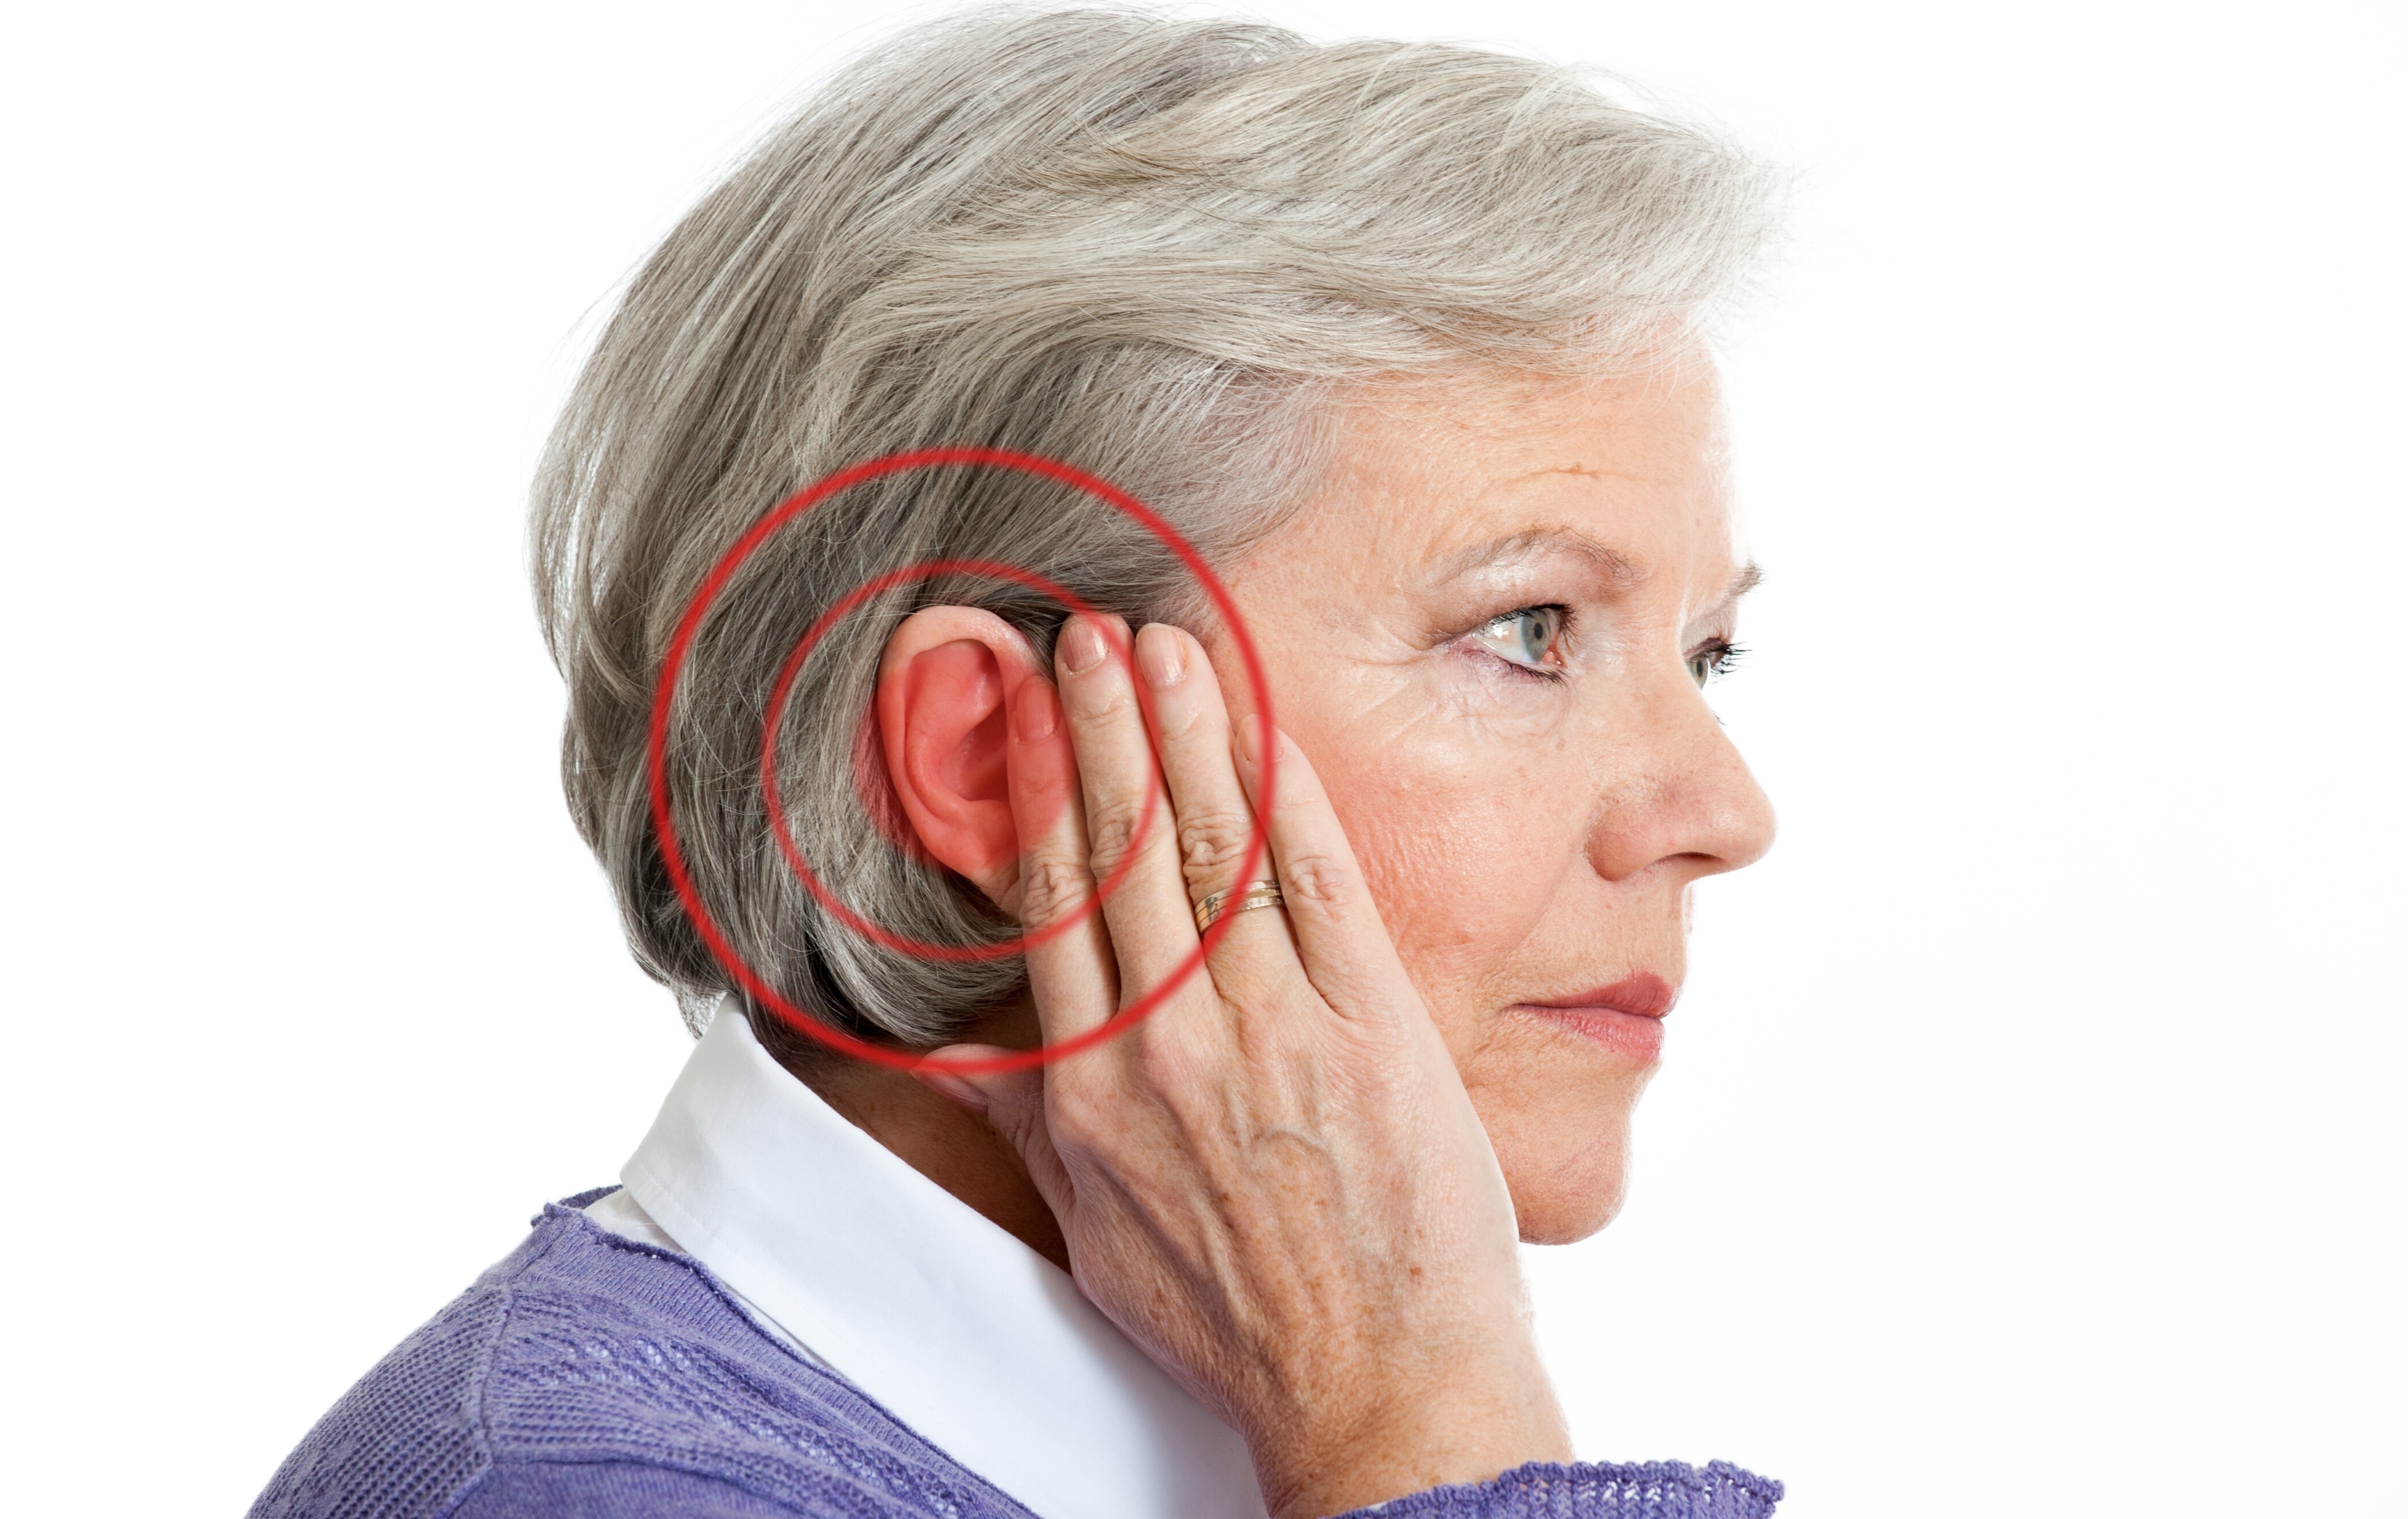 Can the Tinnitus of Acoustic Neuroma Be Subtle?